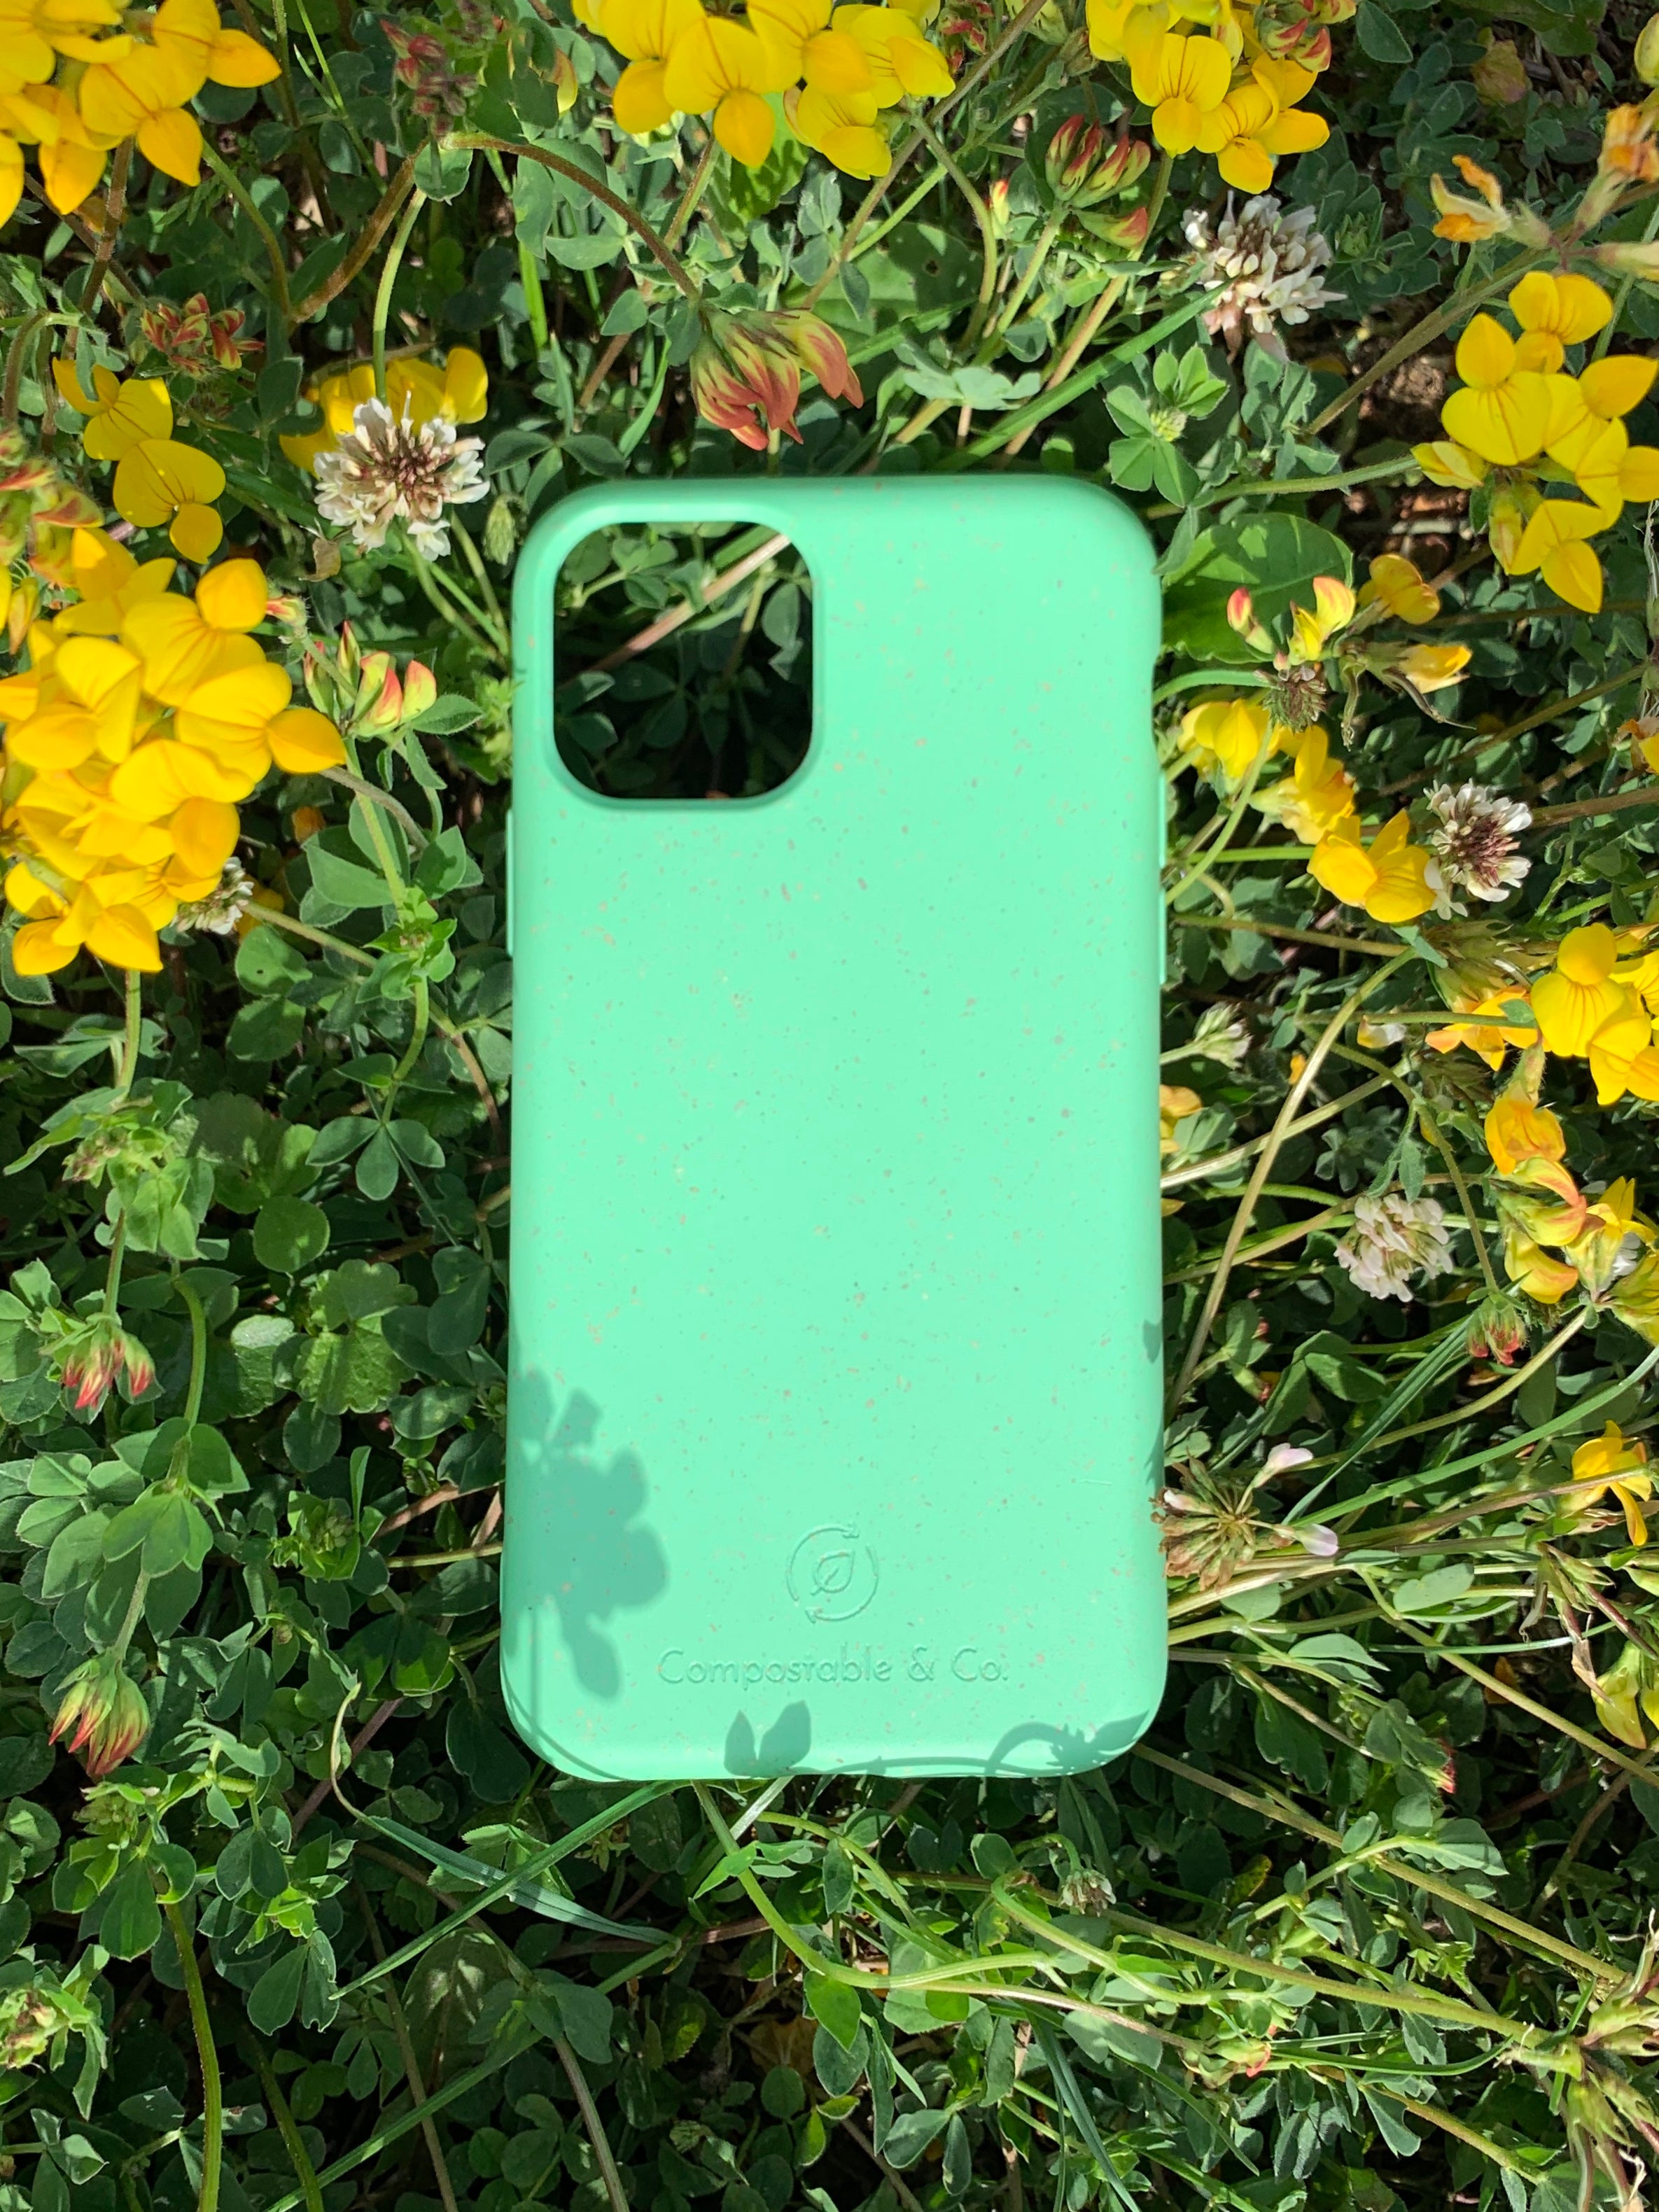 Compostable & Co. iPhone 11 pro green biodegradable phone case with natural background